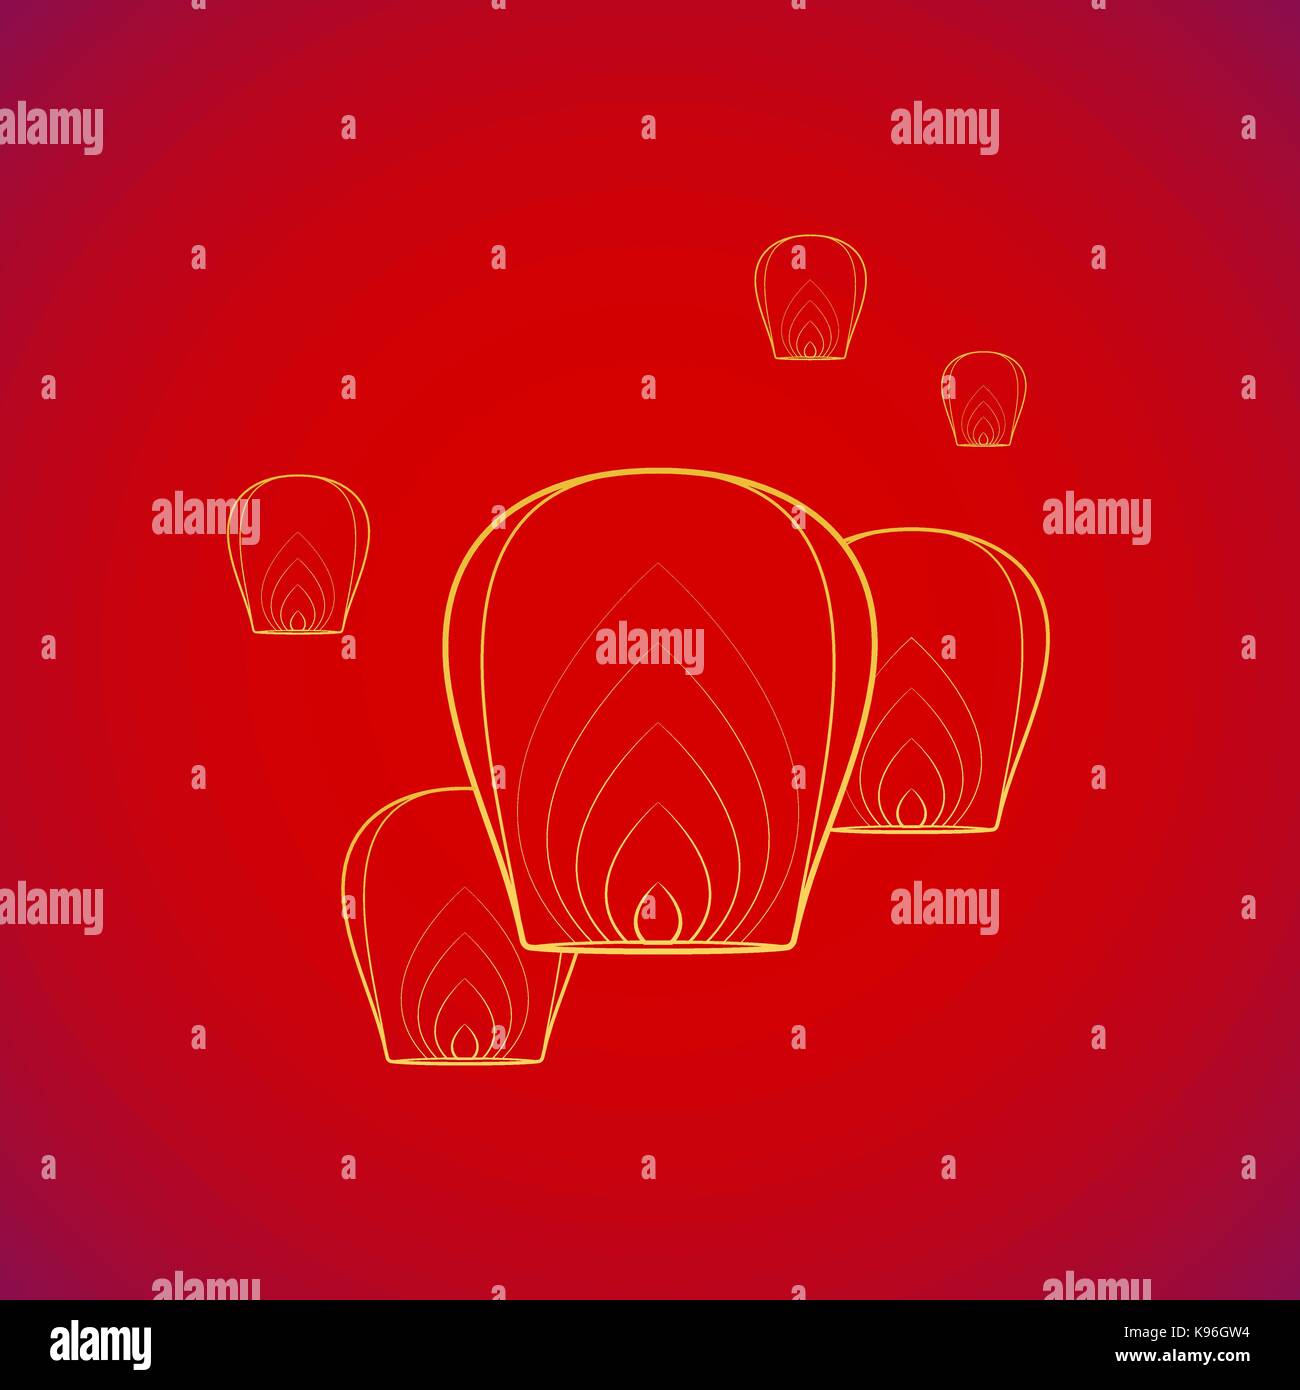 vector gold traditional Chinese floating sky lanterns Kongming  yellow contour illustration design on red background Stock Vector